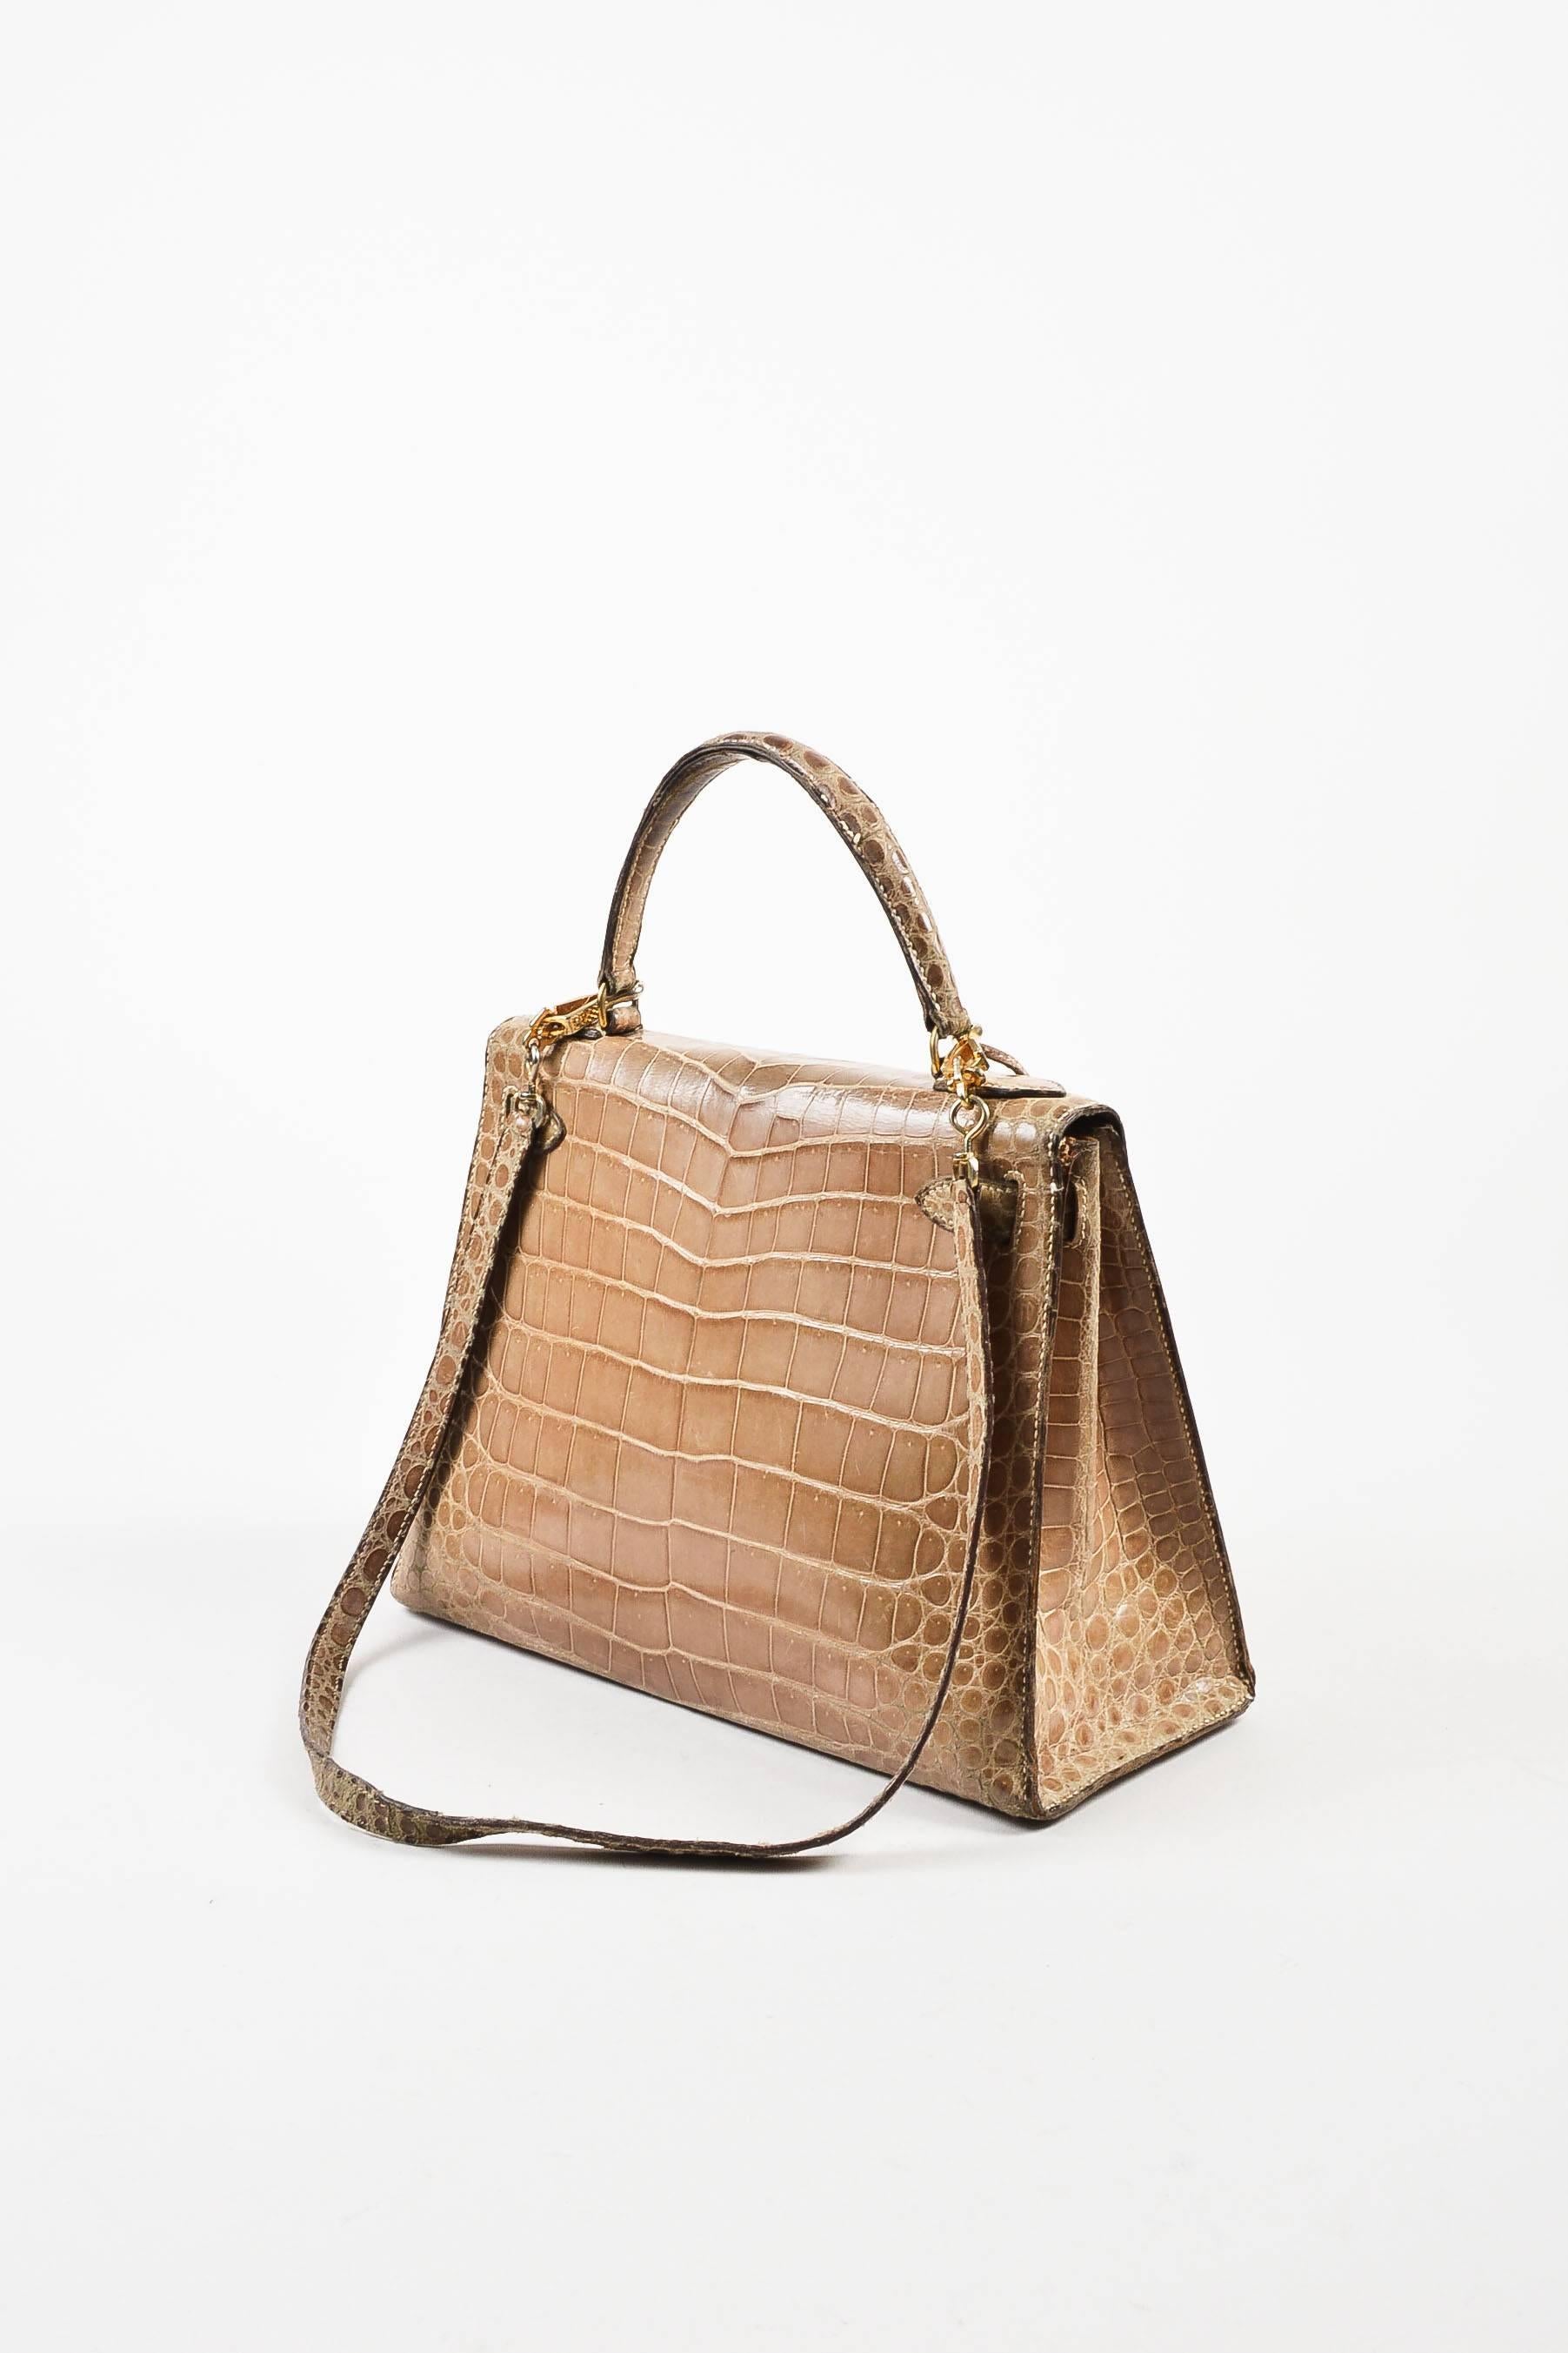 Comes in box with dust bag. Circa 1982, this vintage 28cm Kelly bag is made from taupe colored crocodile leather and accented with gold-tone hardware. It has one flat top strap and a removable shoulder strap. Front straps and turn lock can be